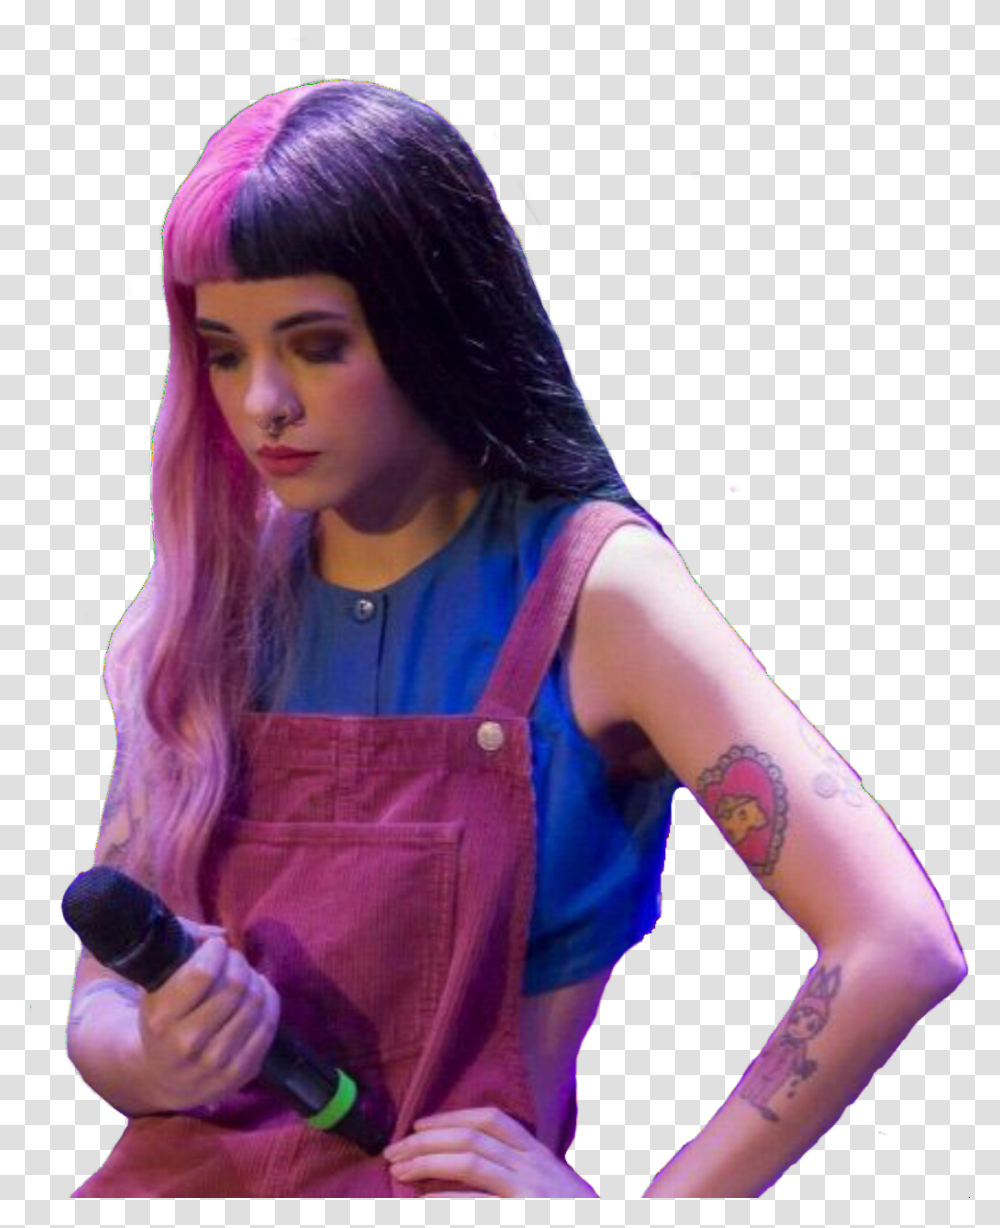 Image About Melanie Martinez In Pngs, Skin, Person, Tattoo, Finger Transparent Png